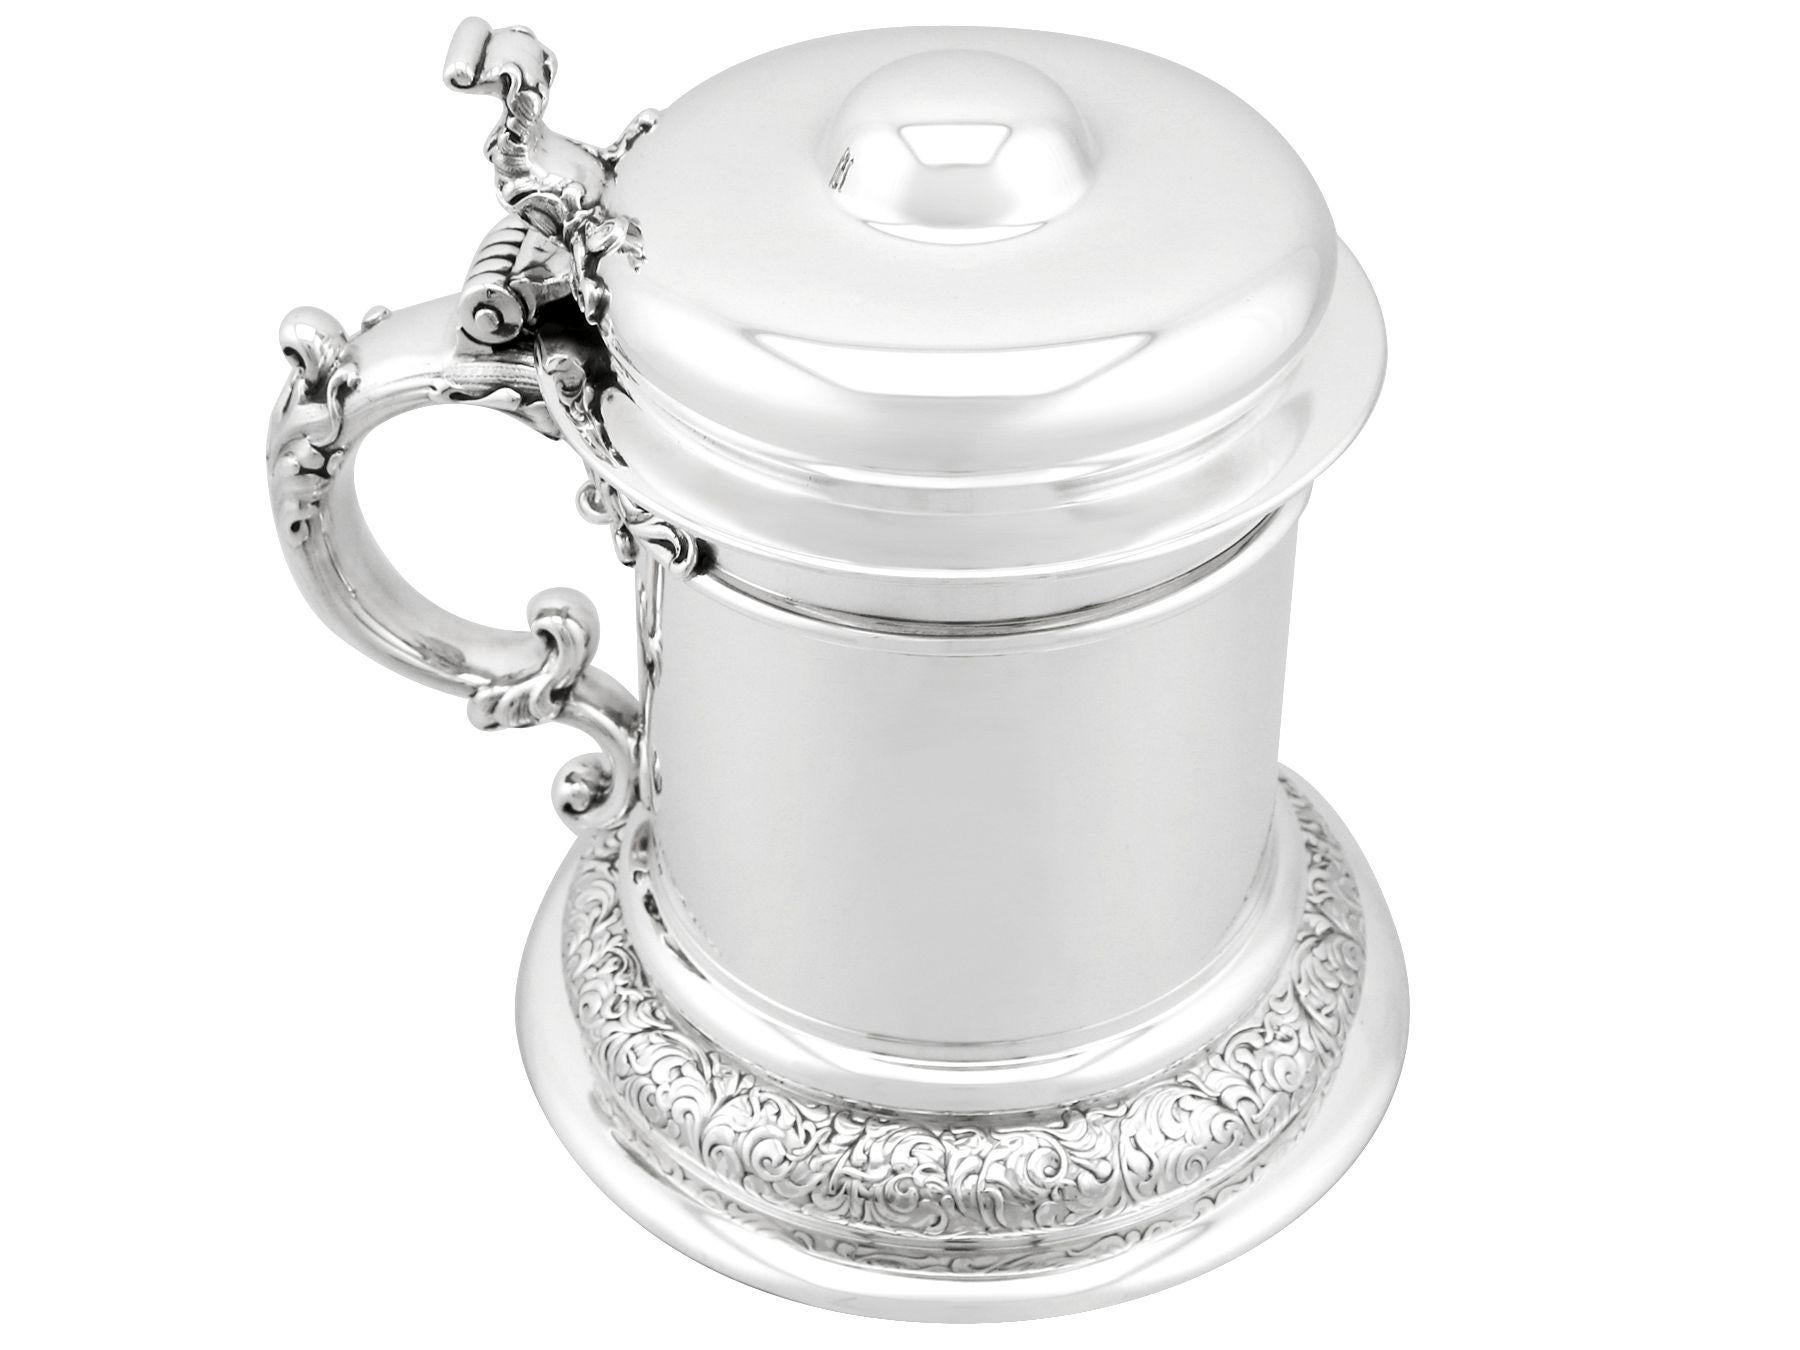 An exceptional, fine and impressive antique American sterling silver quart tankard; an addition to our range of collectable silverware

This exceptional antique American sterling silver tankard has a plain tapering cylindrical form onto a circular